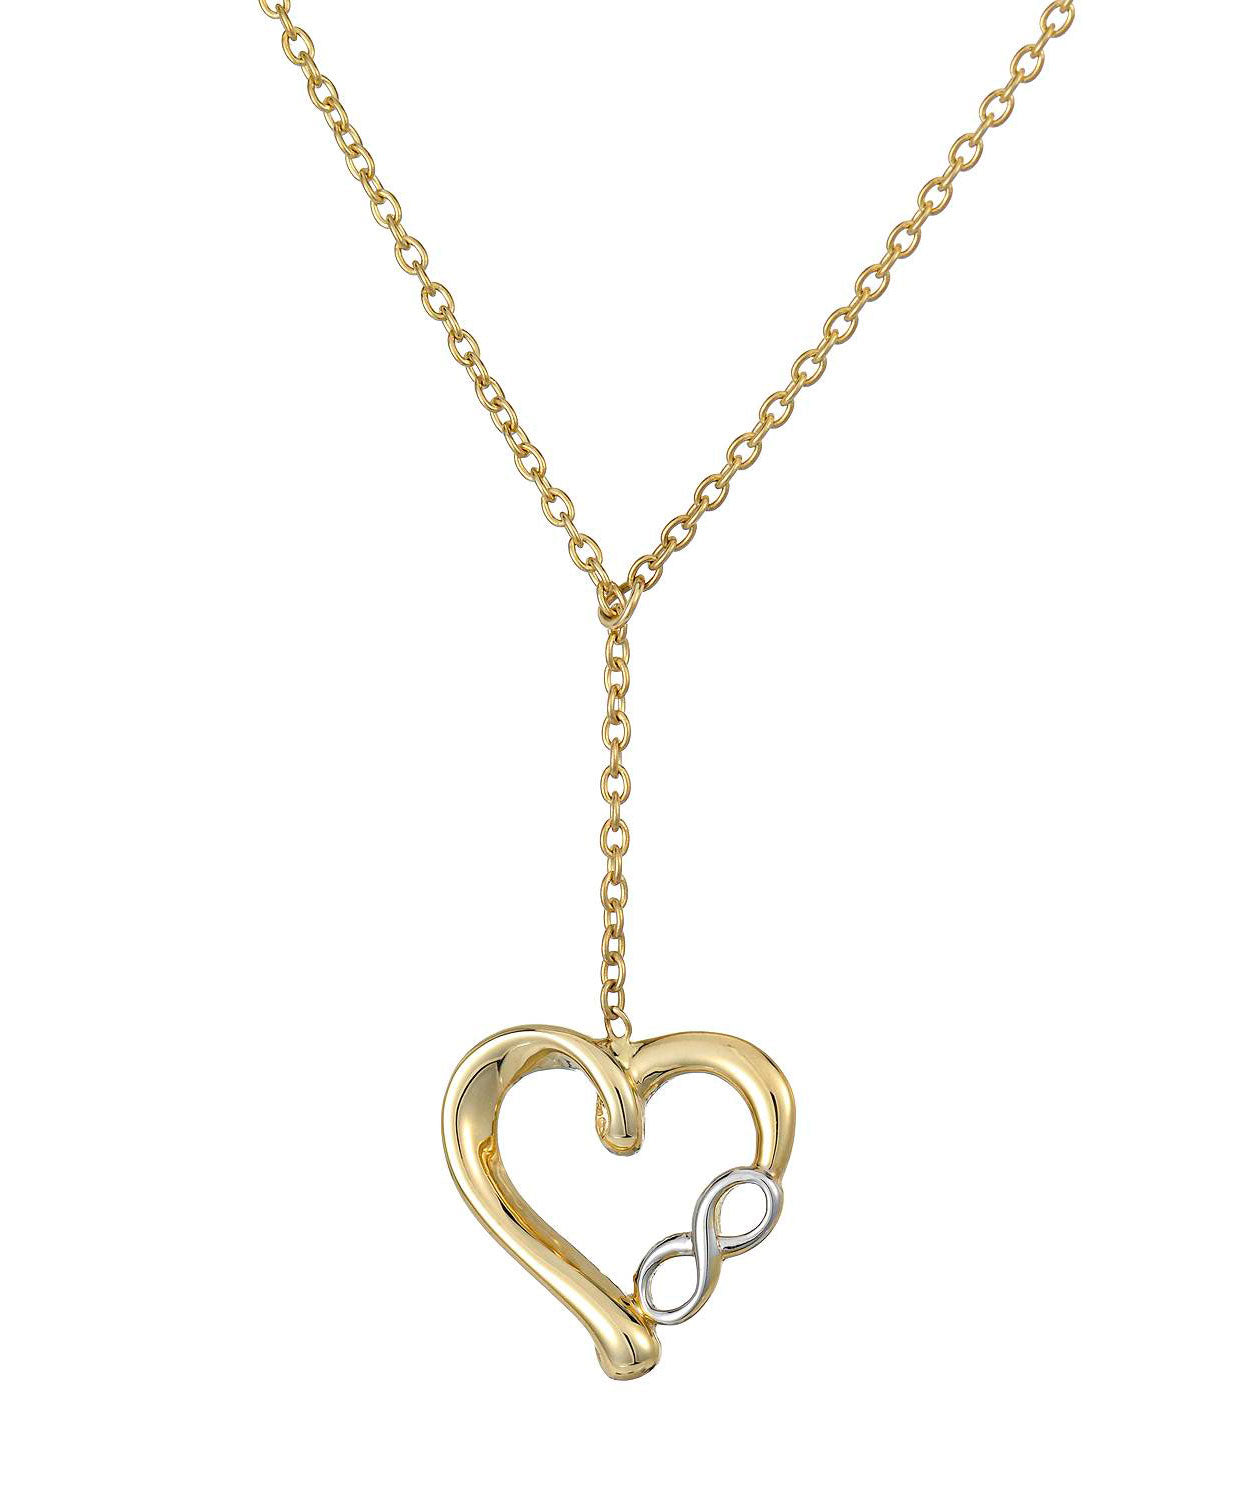 Love Story Collection 14k Gold Heart Necklace - Made in Italy View 1